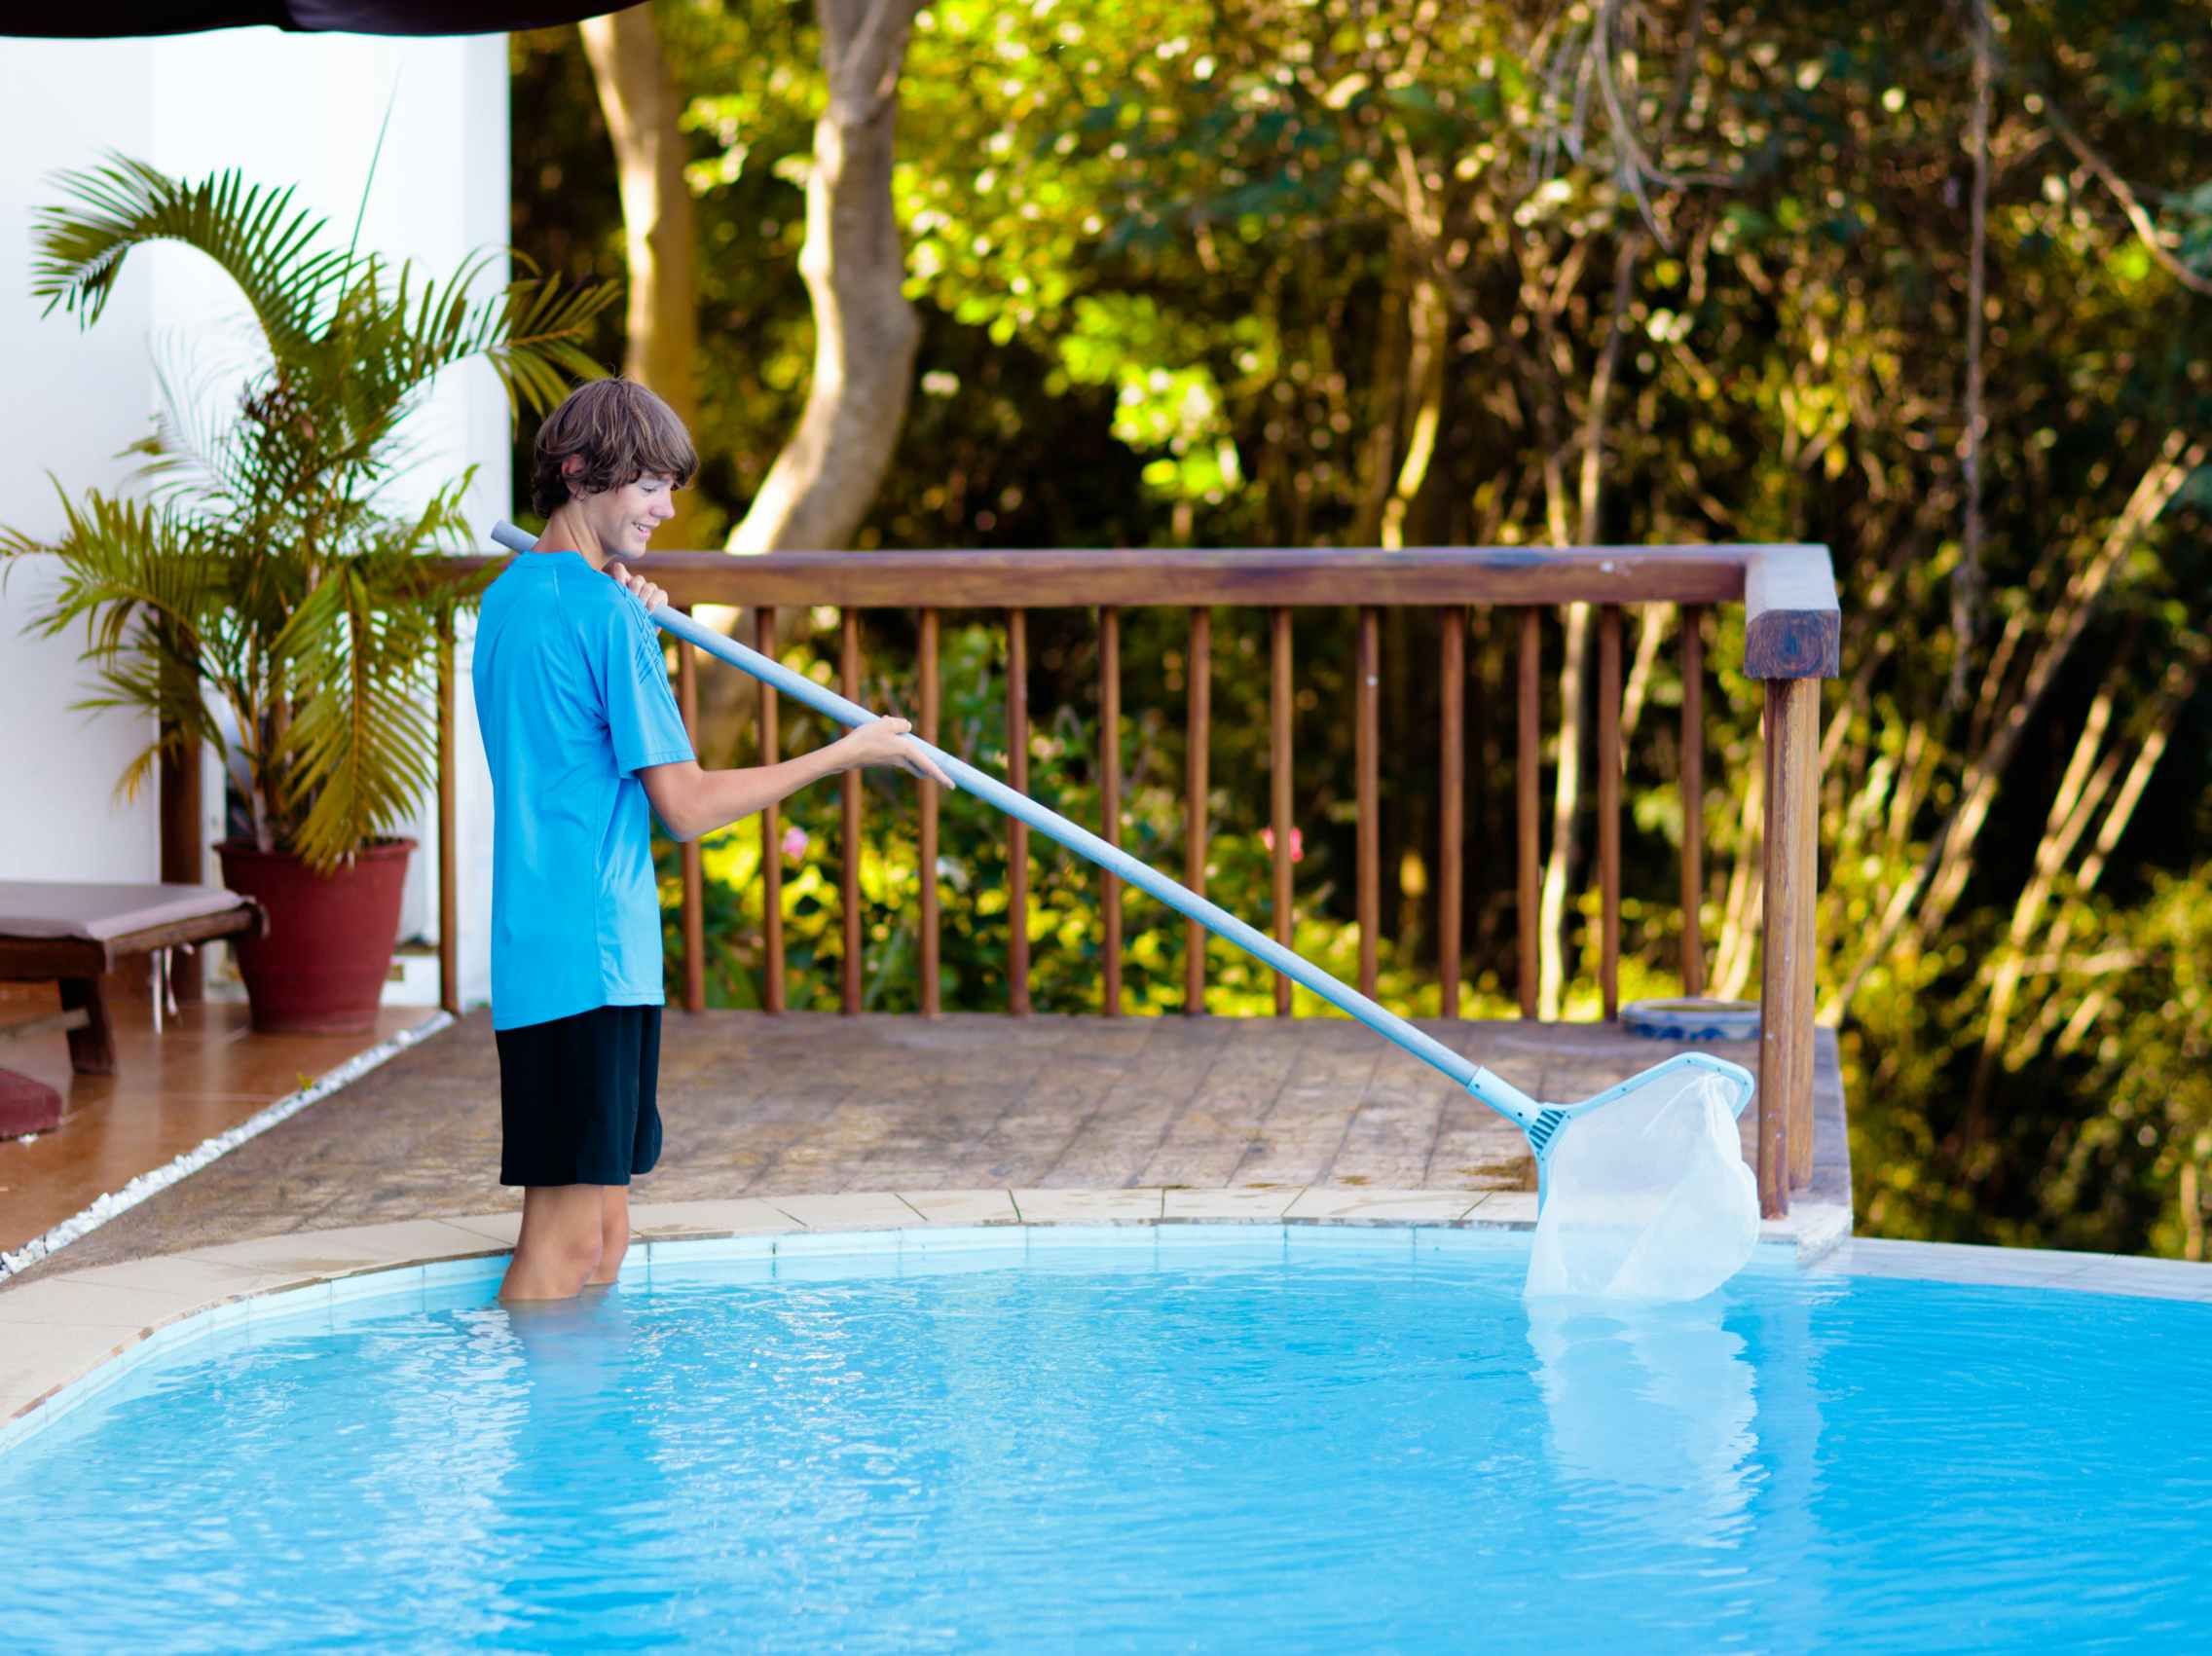 A teenage boy using a pool skimmer to clean debris from a pool.